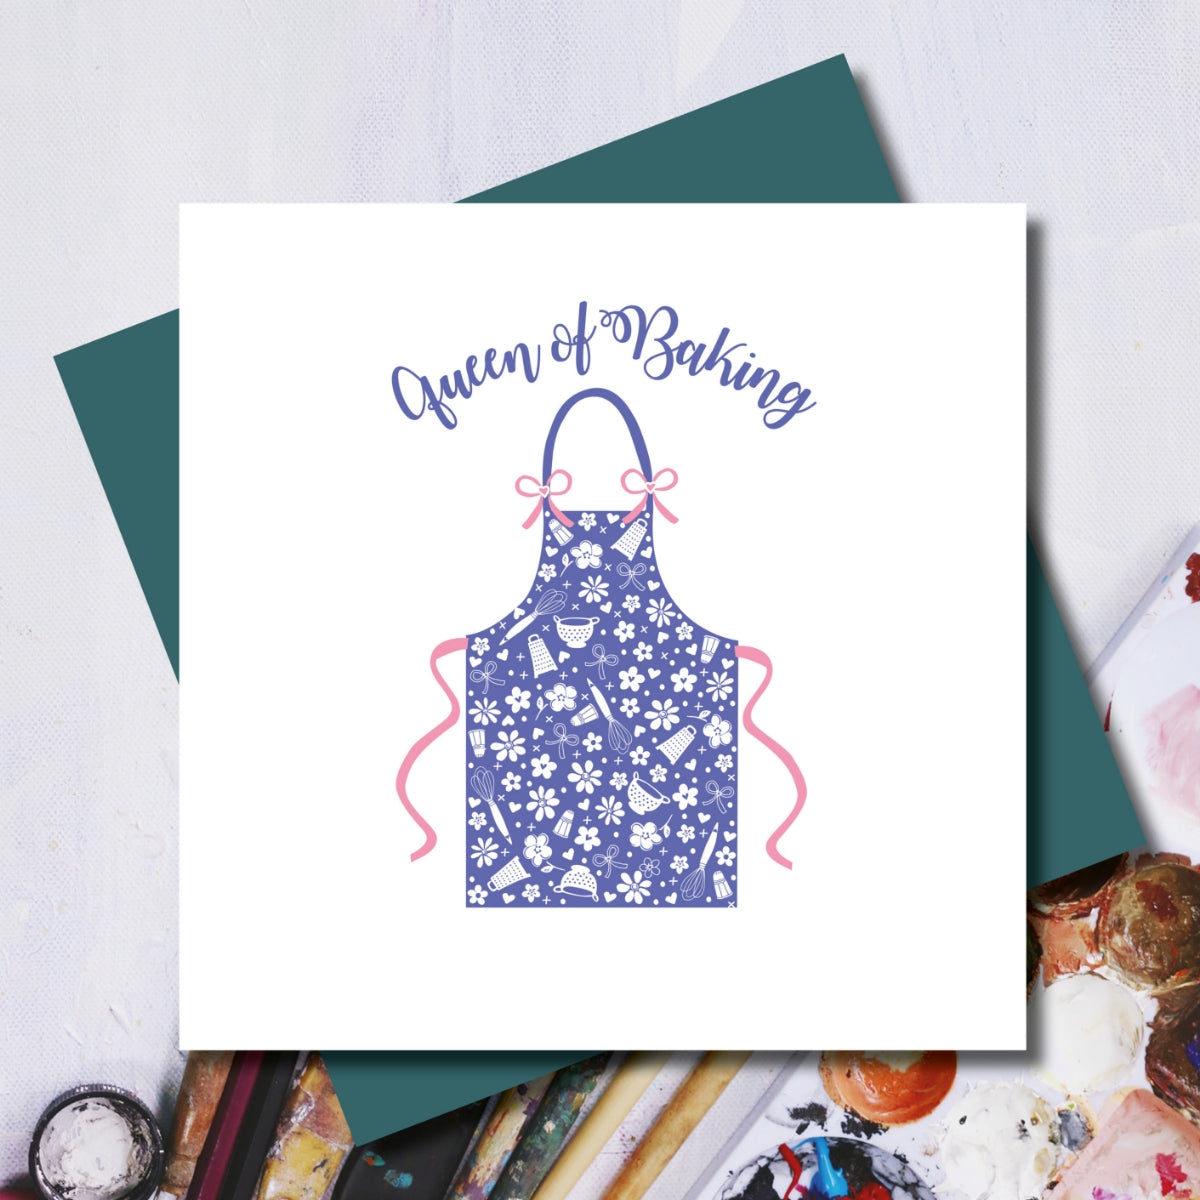 Daisy Cook,Queen of Baking Apron Greeting Card 